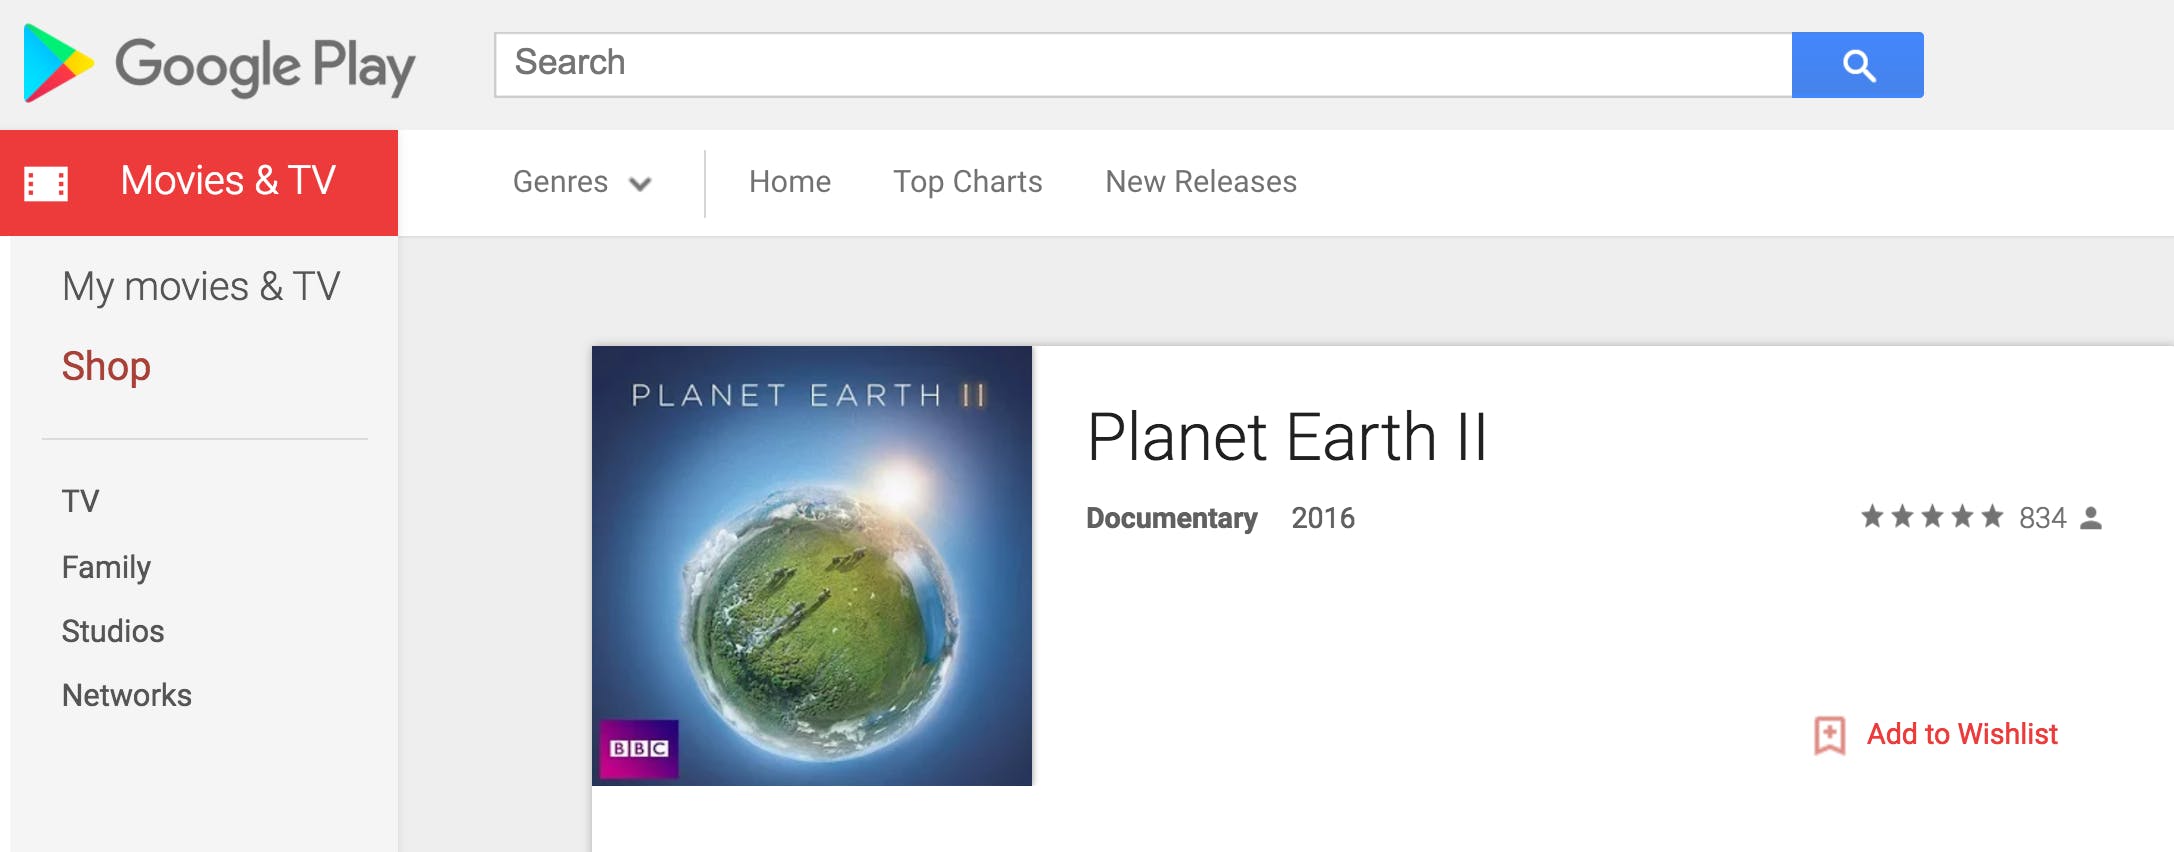 how to watch planet earth 2 : Google Play